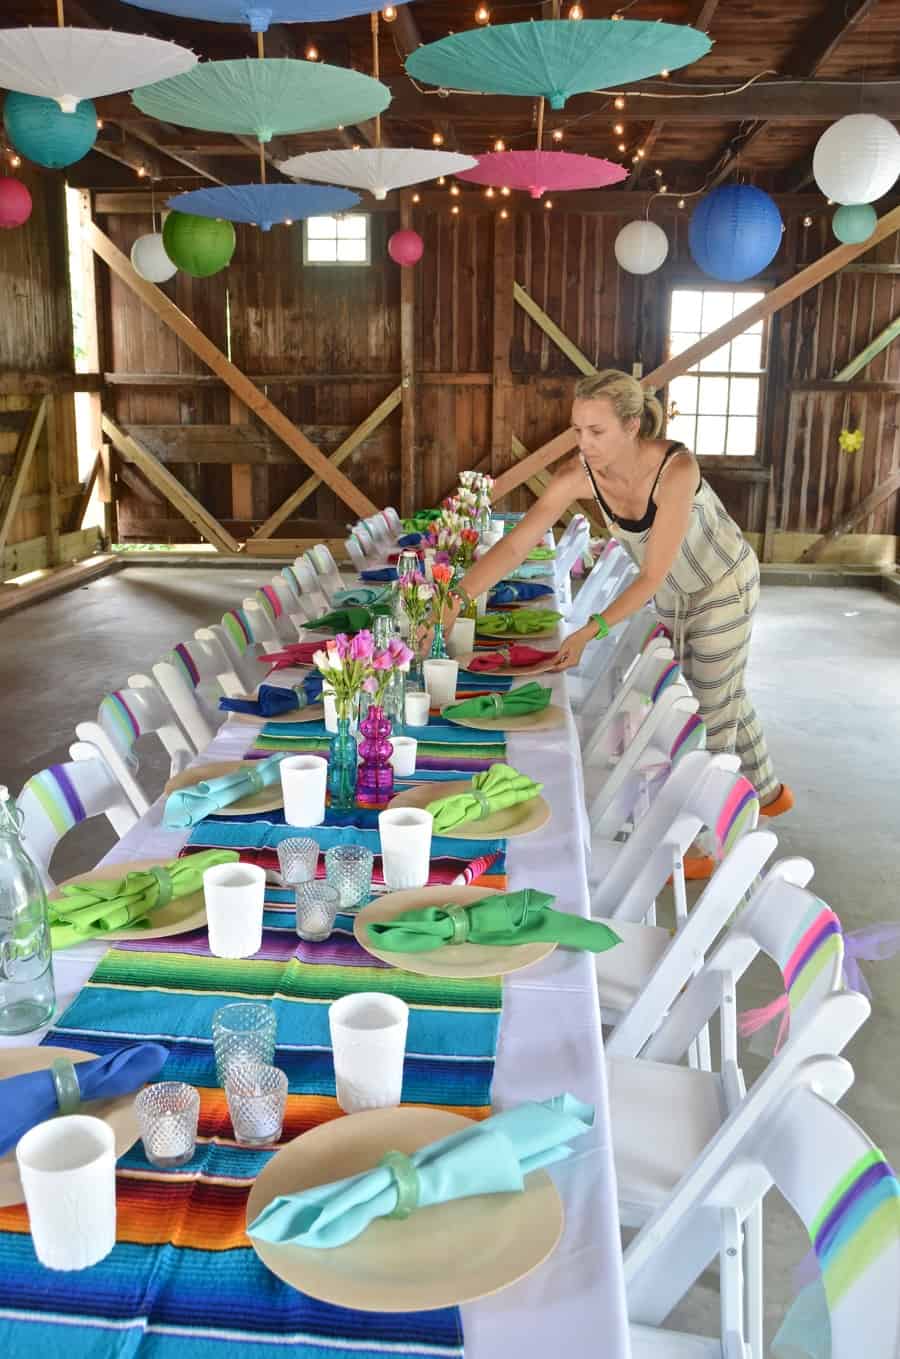 Decorating details to host a colorful rustic barn party.